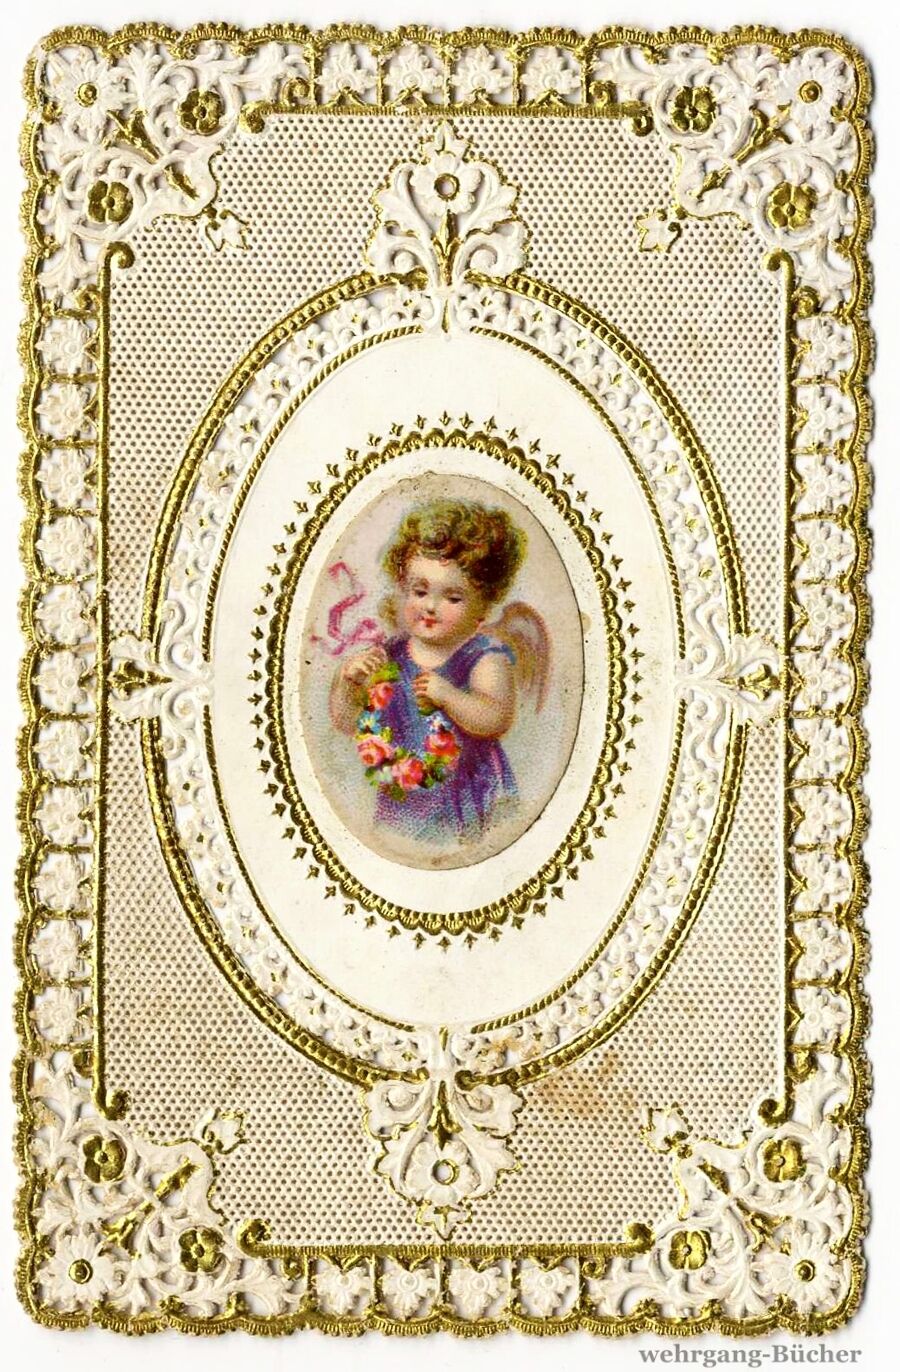 C. 1850 extra fine die cut paper scrap with an Angel medallion in the center